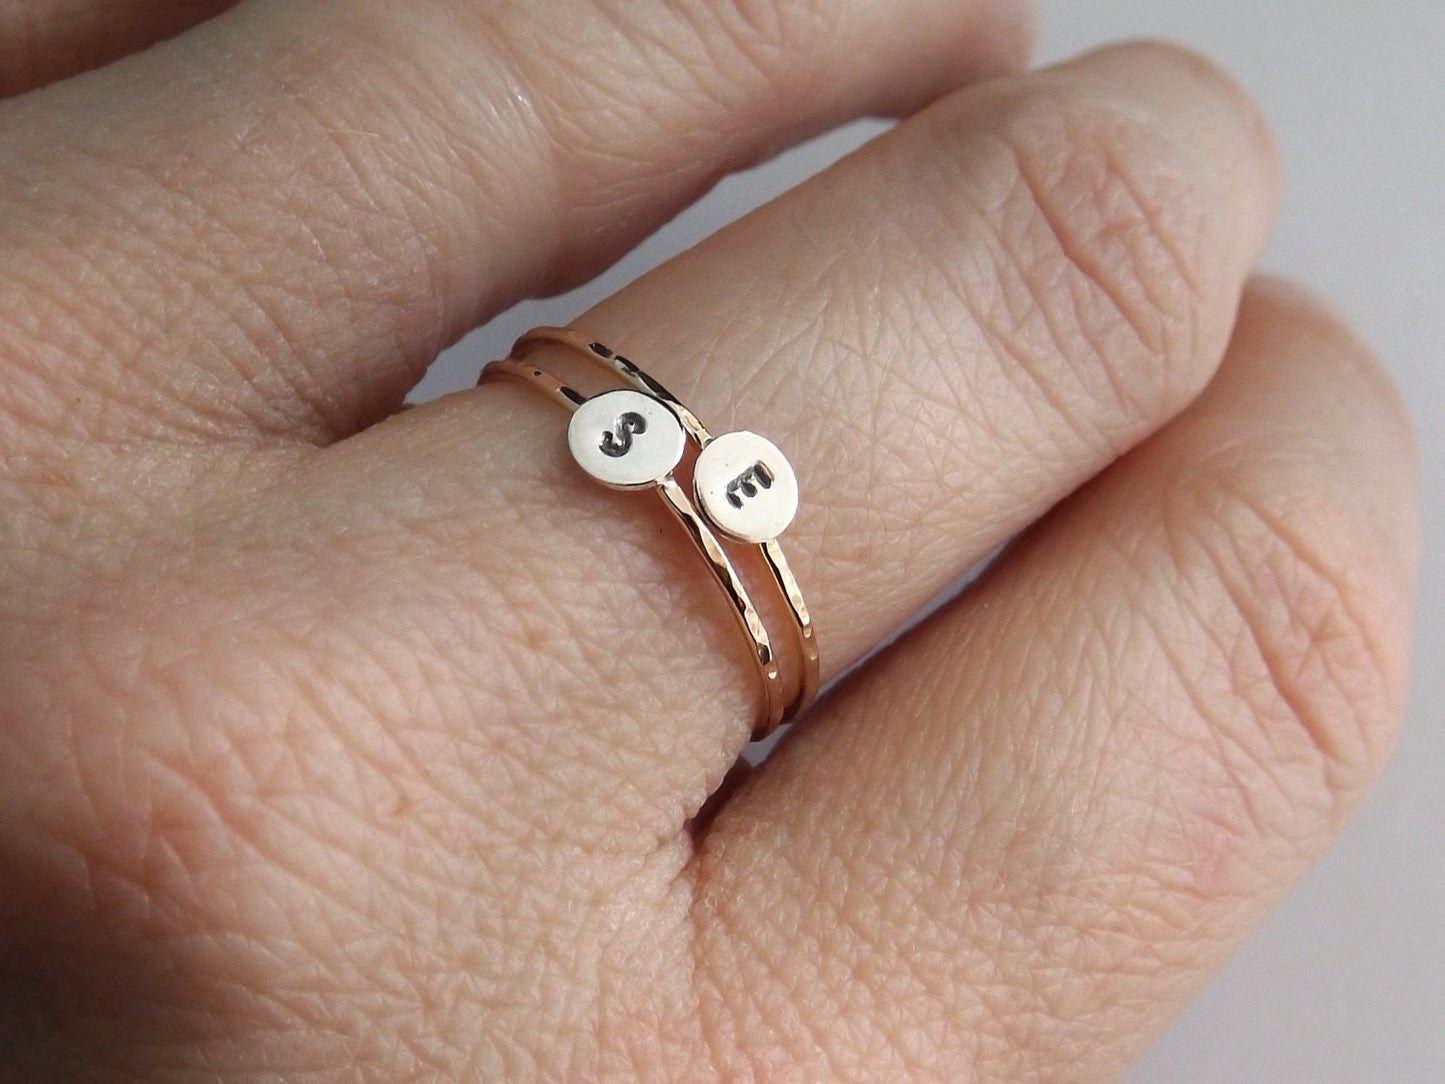 Skinny Gold Initial Stacking Ring, Personalized Rings, Minimalist Rings,Initial Rings, Slim Stacking Rings, Gold Ring, Rings, Couples Rings